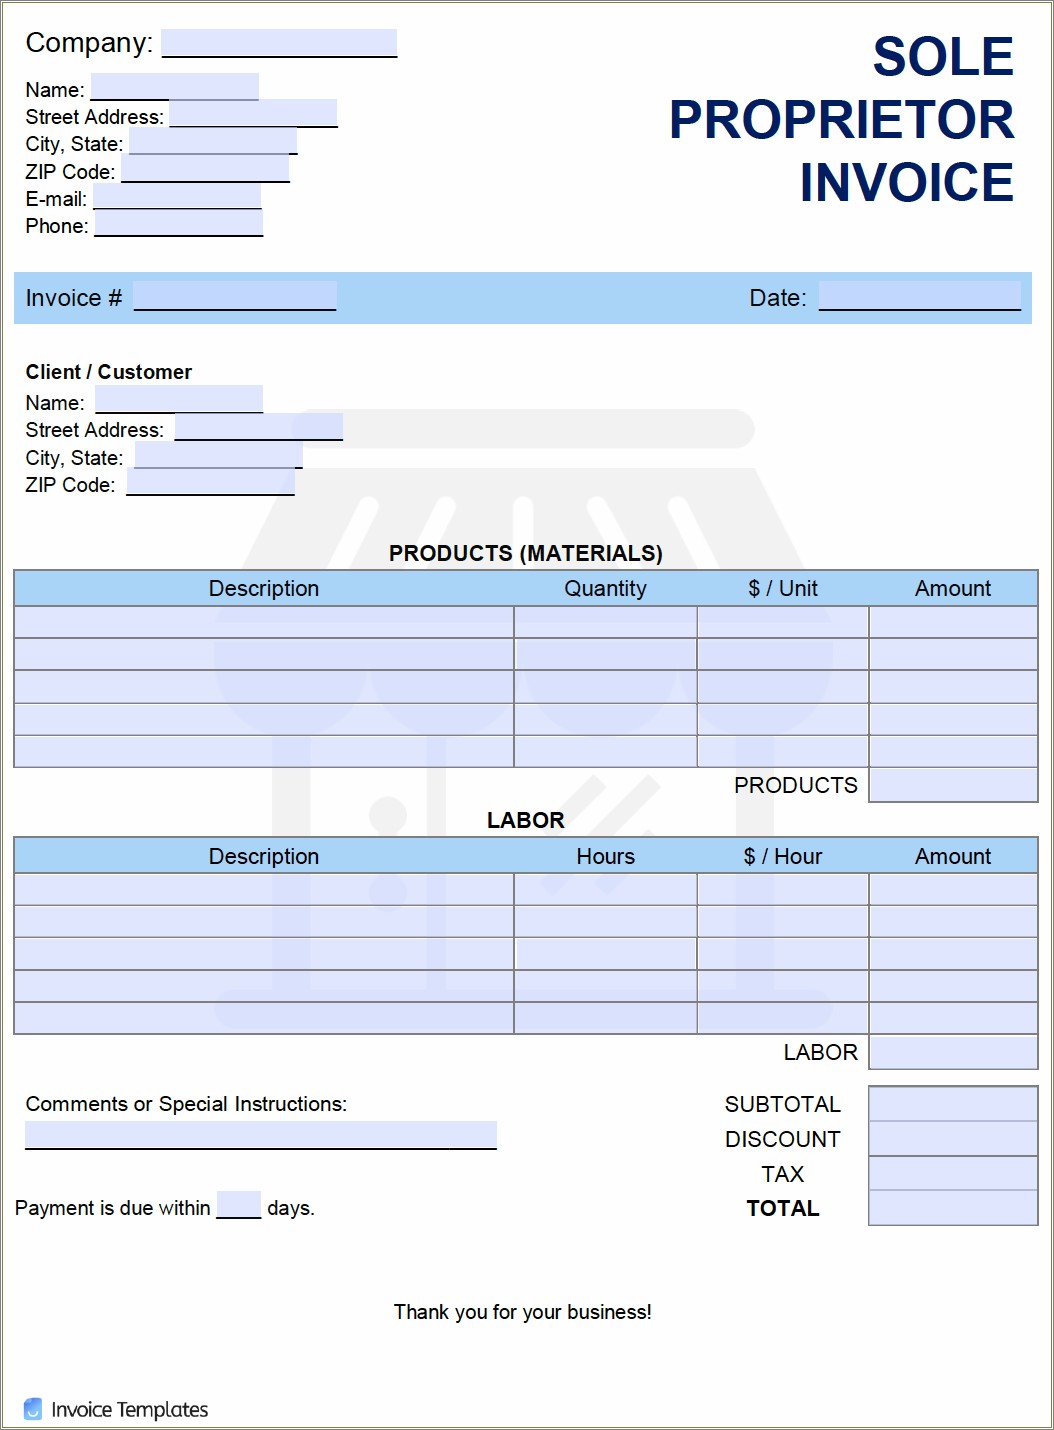 Free Tax Invoice Template Excel South Africa